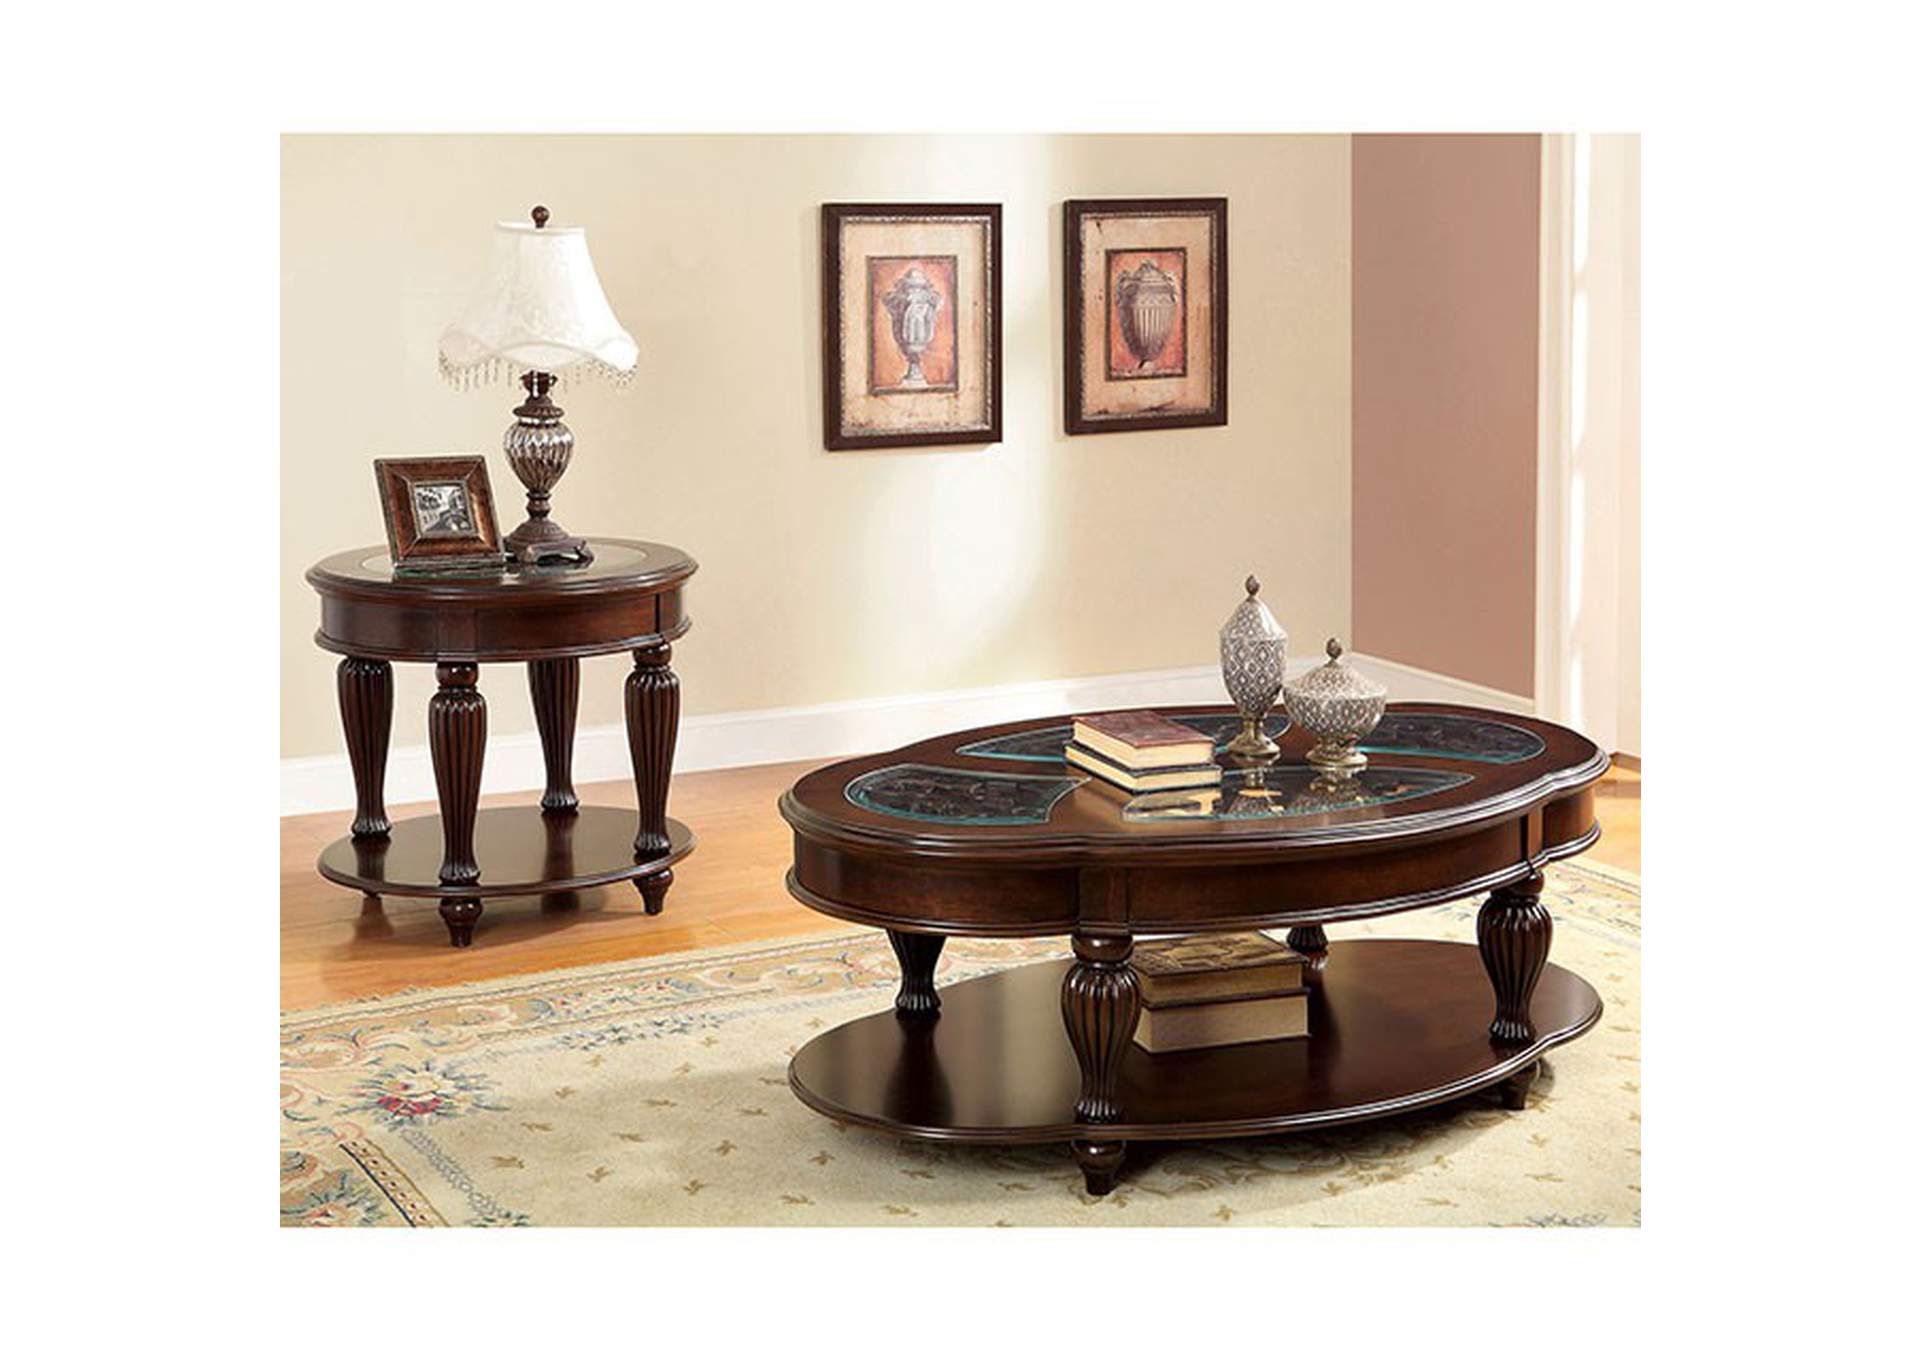 Centinel Dark Cherry Coffee Table Vip Furniture Outlet – Upper Darby, Pa With Regard To Dark Cherry Coffee Tables (View 18 of 20)